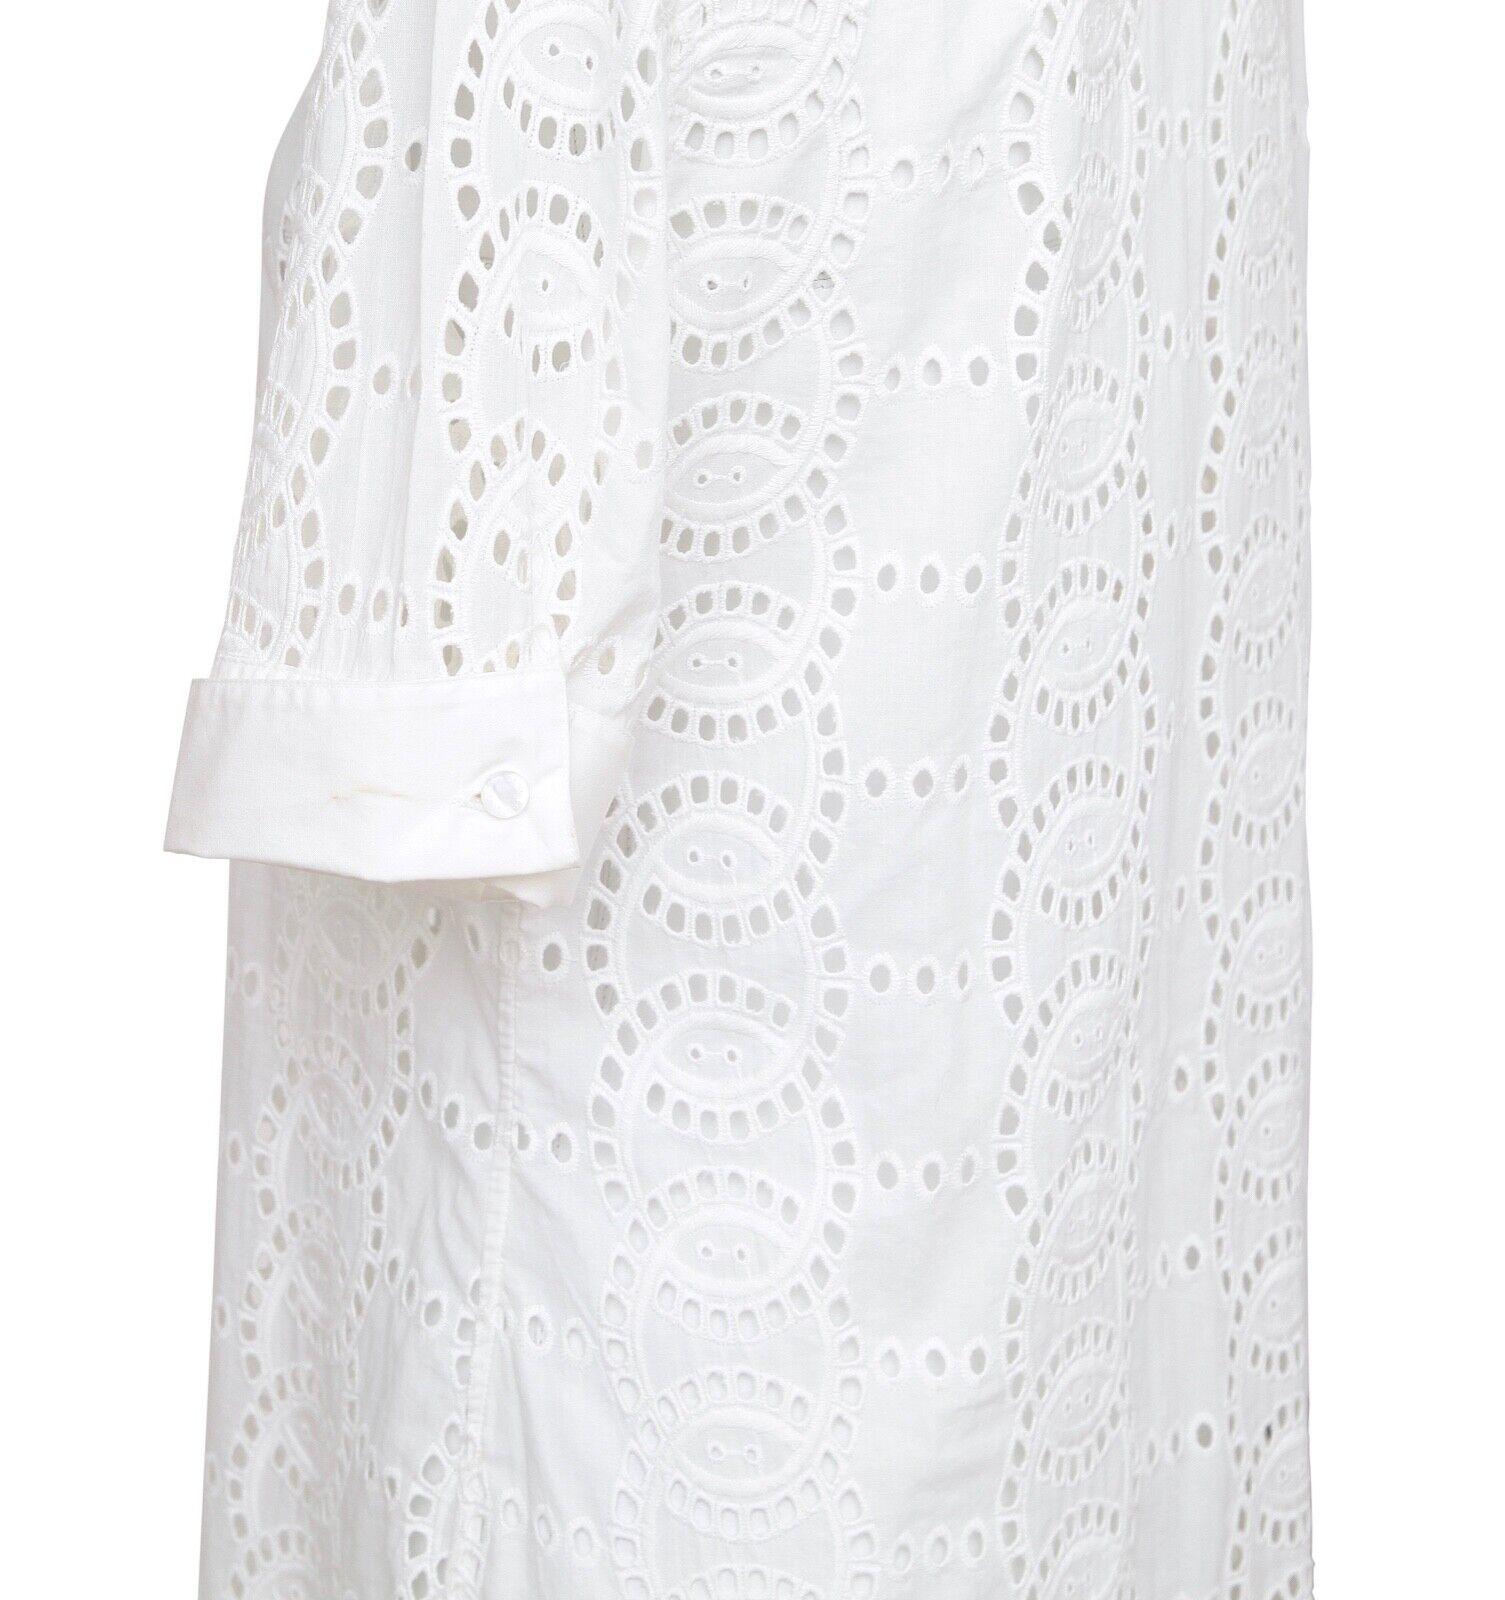 ANNE FONTAINE Shirt Dress White Short Sleeve Button Down Eyelet Collar Cotton 40 For Sale 2